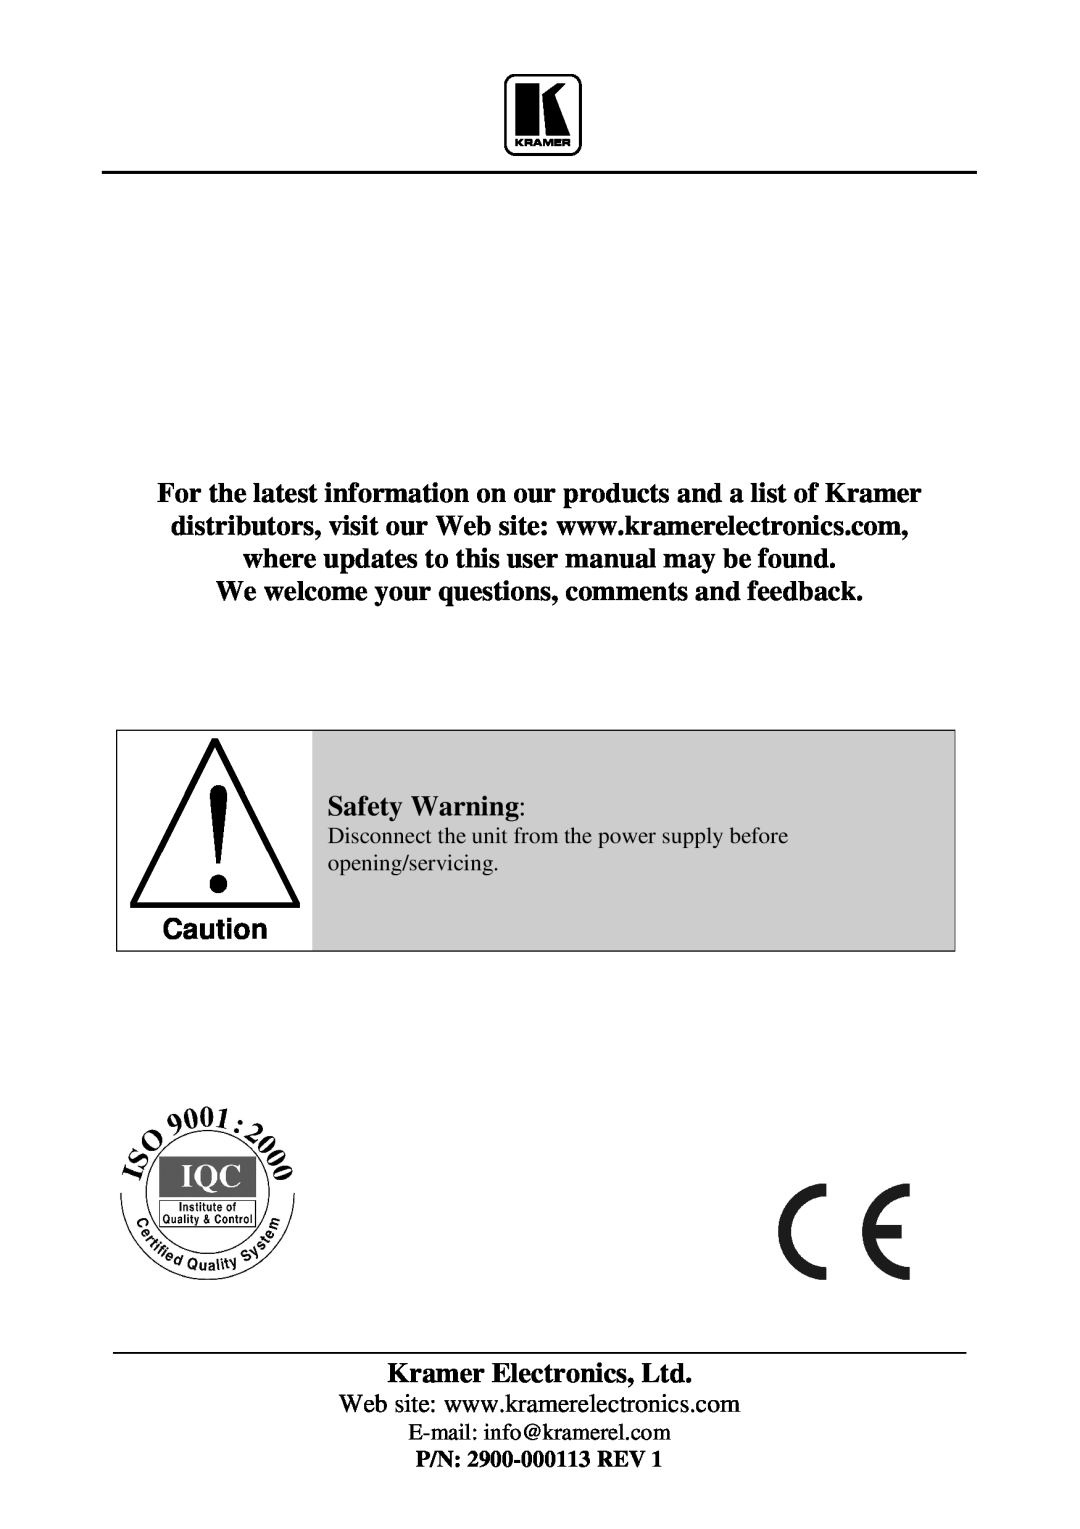 Kramer Electronics 900 user manual We welcome your questions, comments and feedback, Safety Warning 